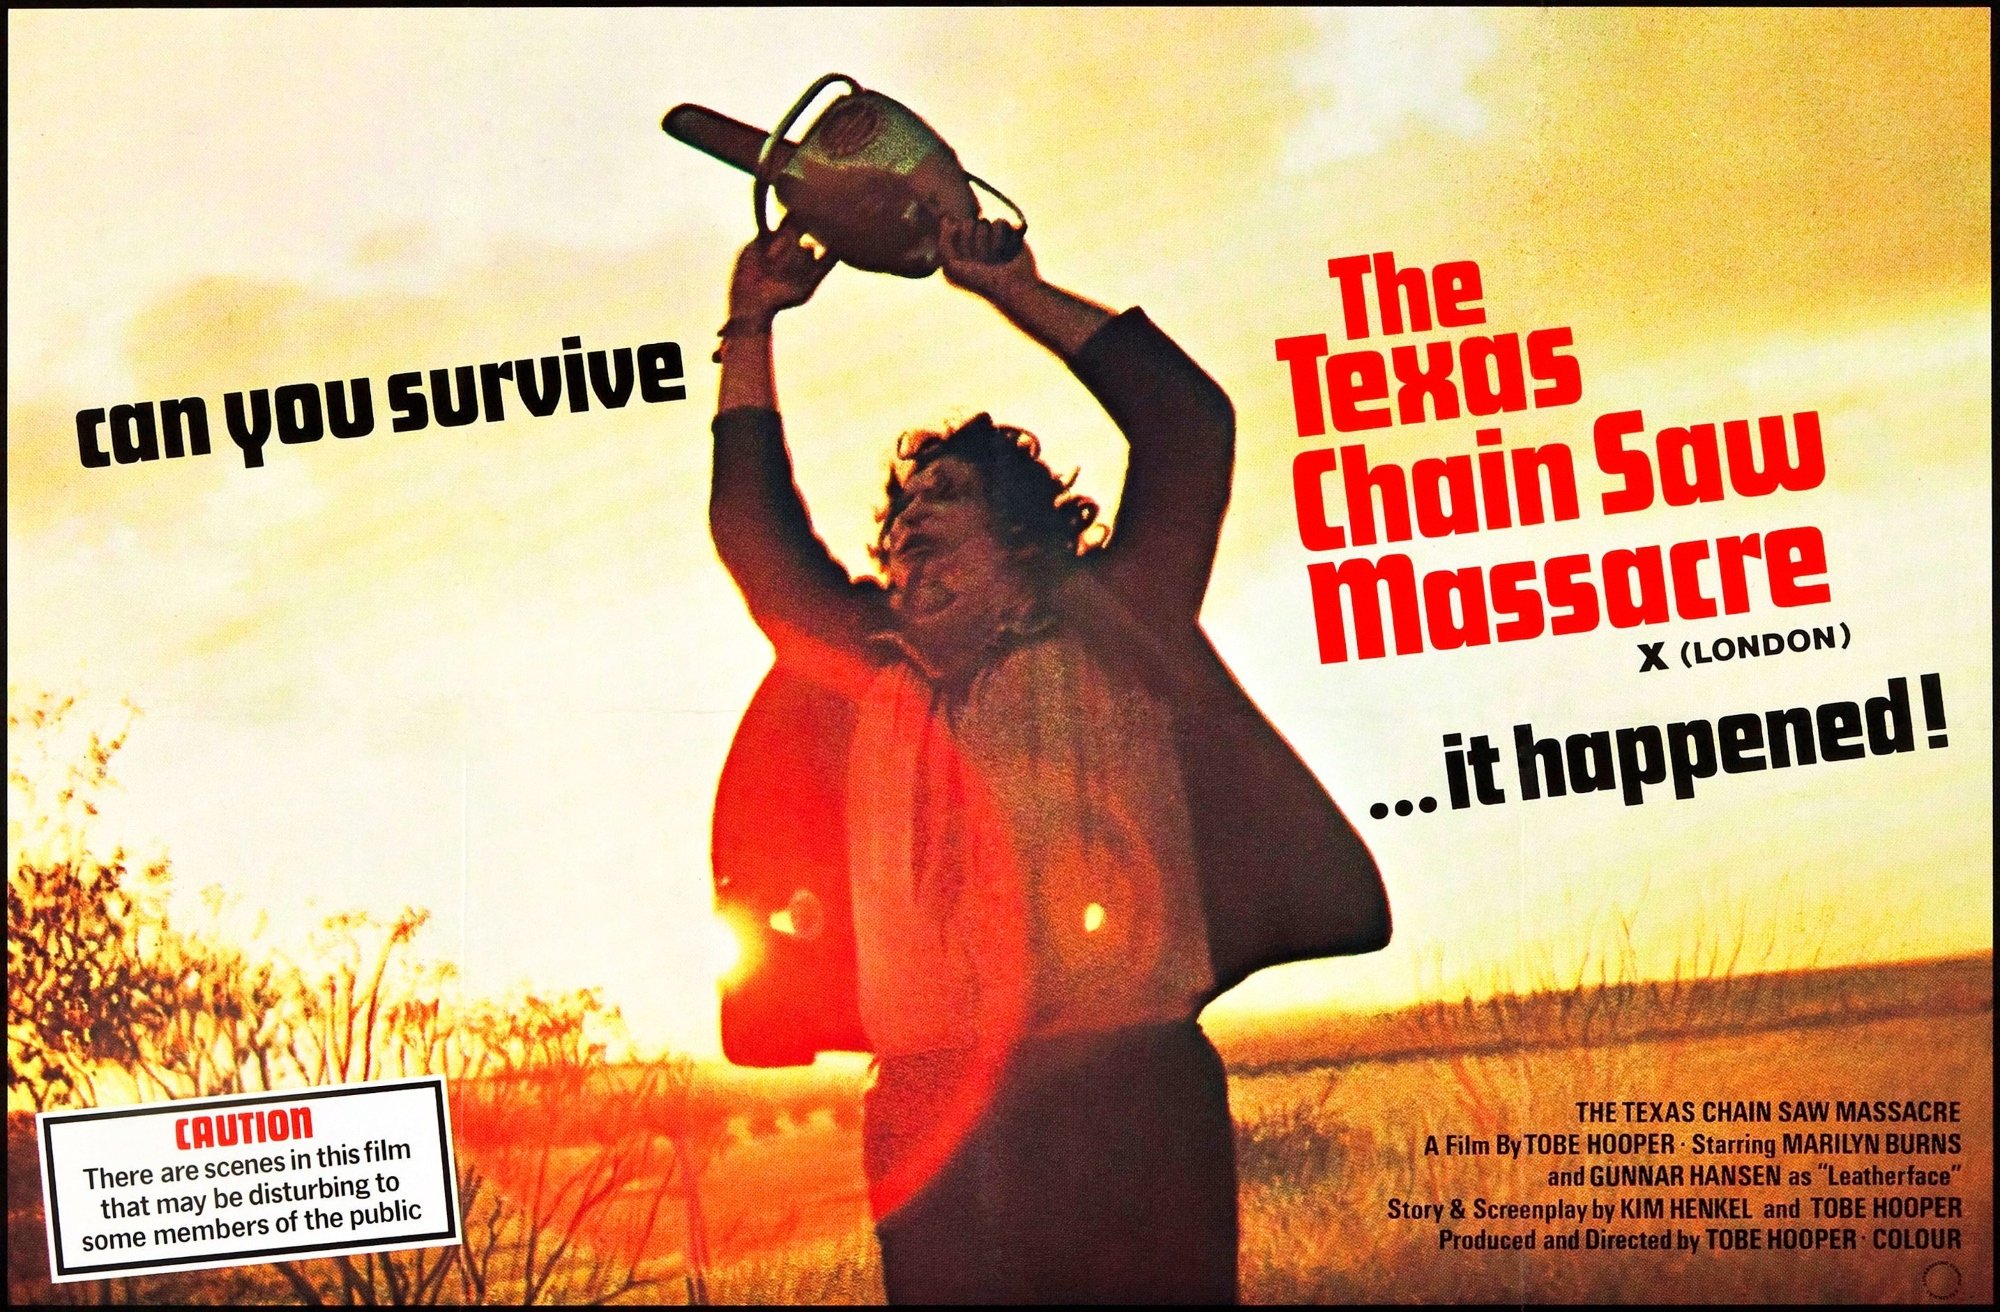 'The Texas Chainsaw Massacre' image in article about timelines holding chainsaw in the air